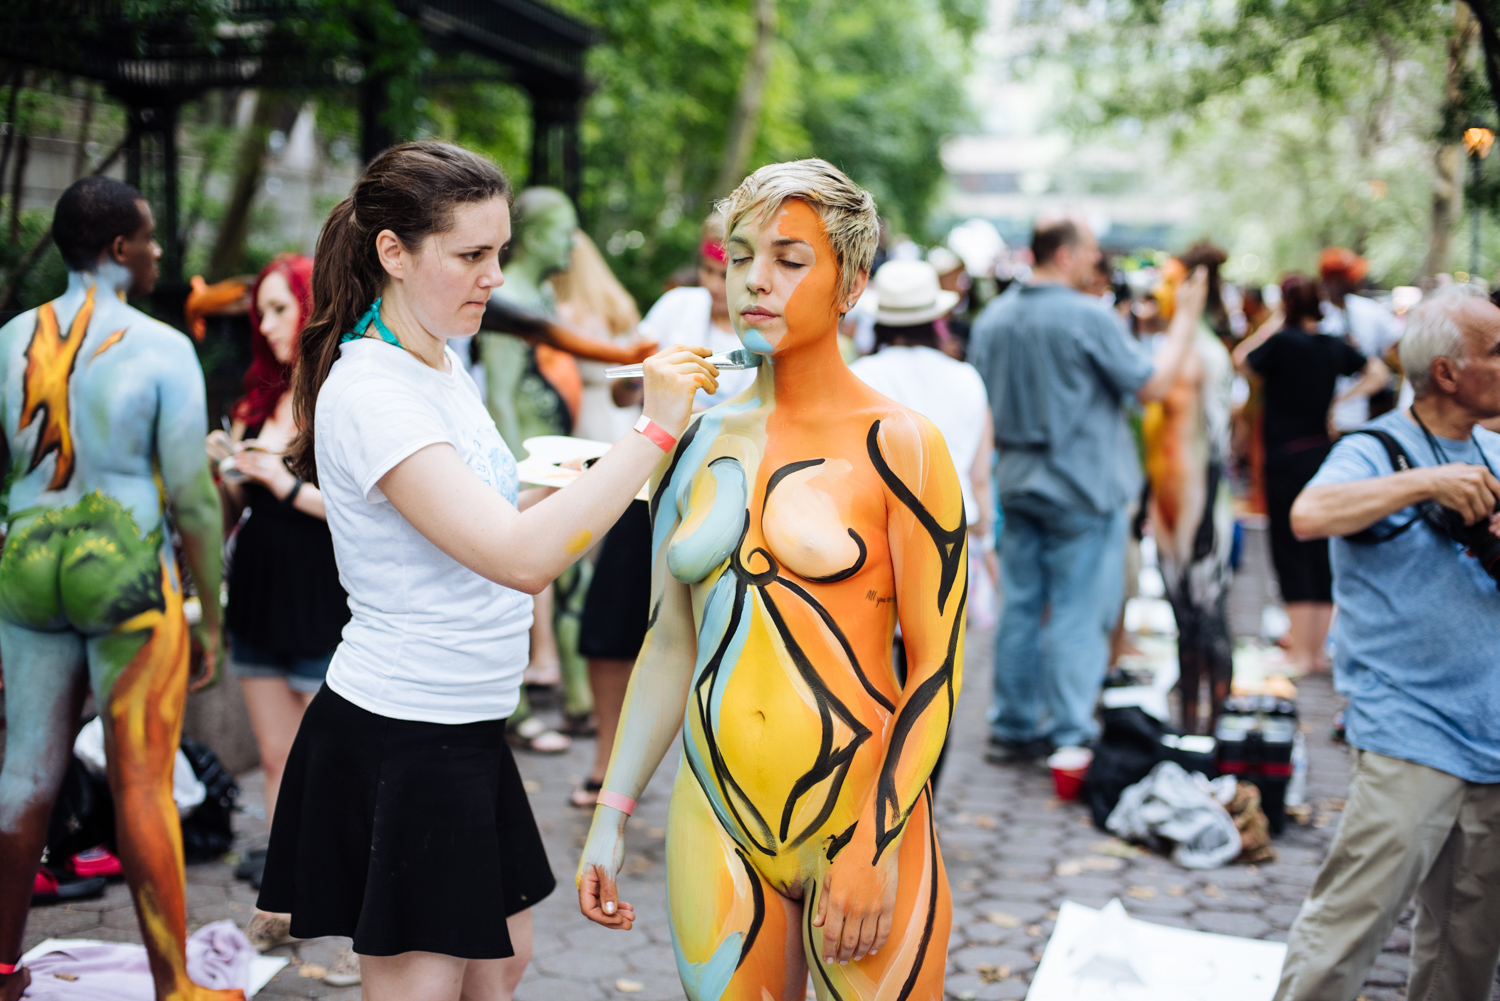 Naked body painting in new york pic